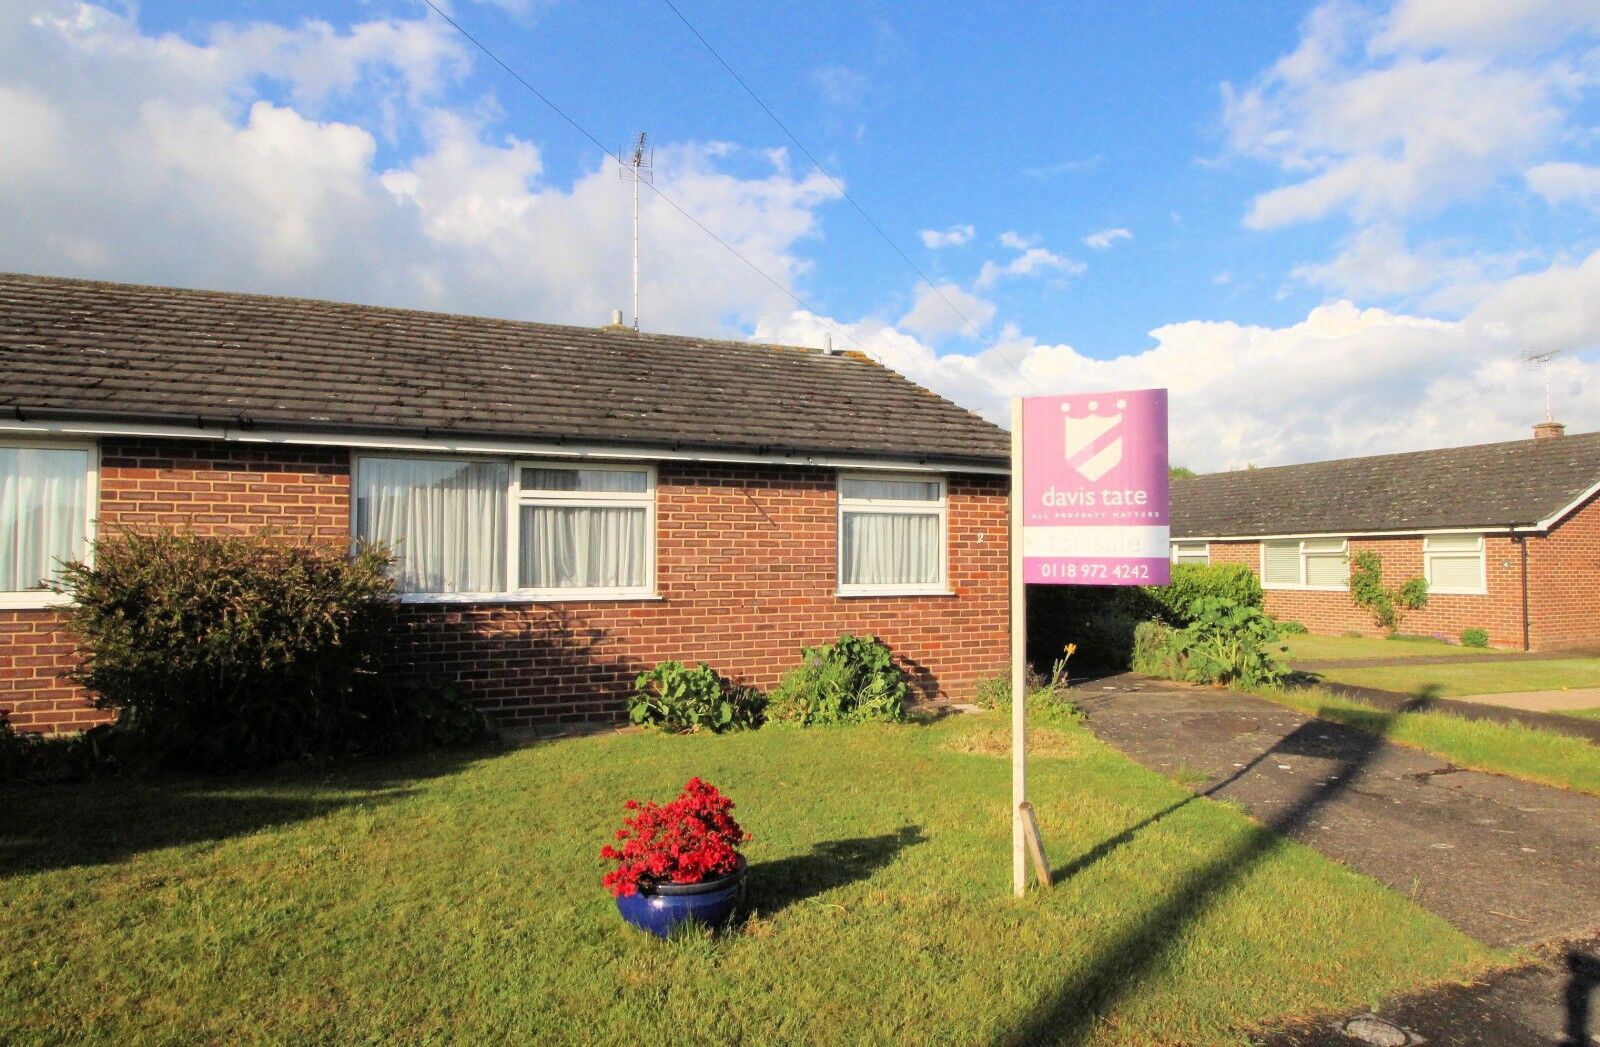 2 bedroom semi detached bungalow for sale Appletree Close, Sonning Common, RG4, main image